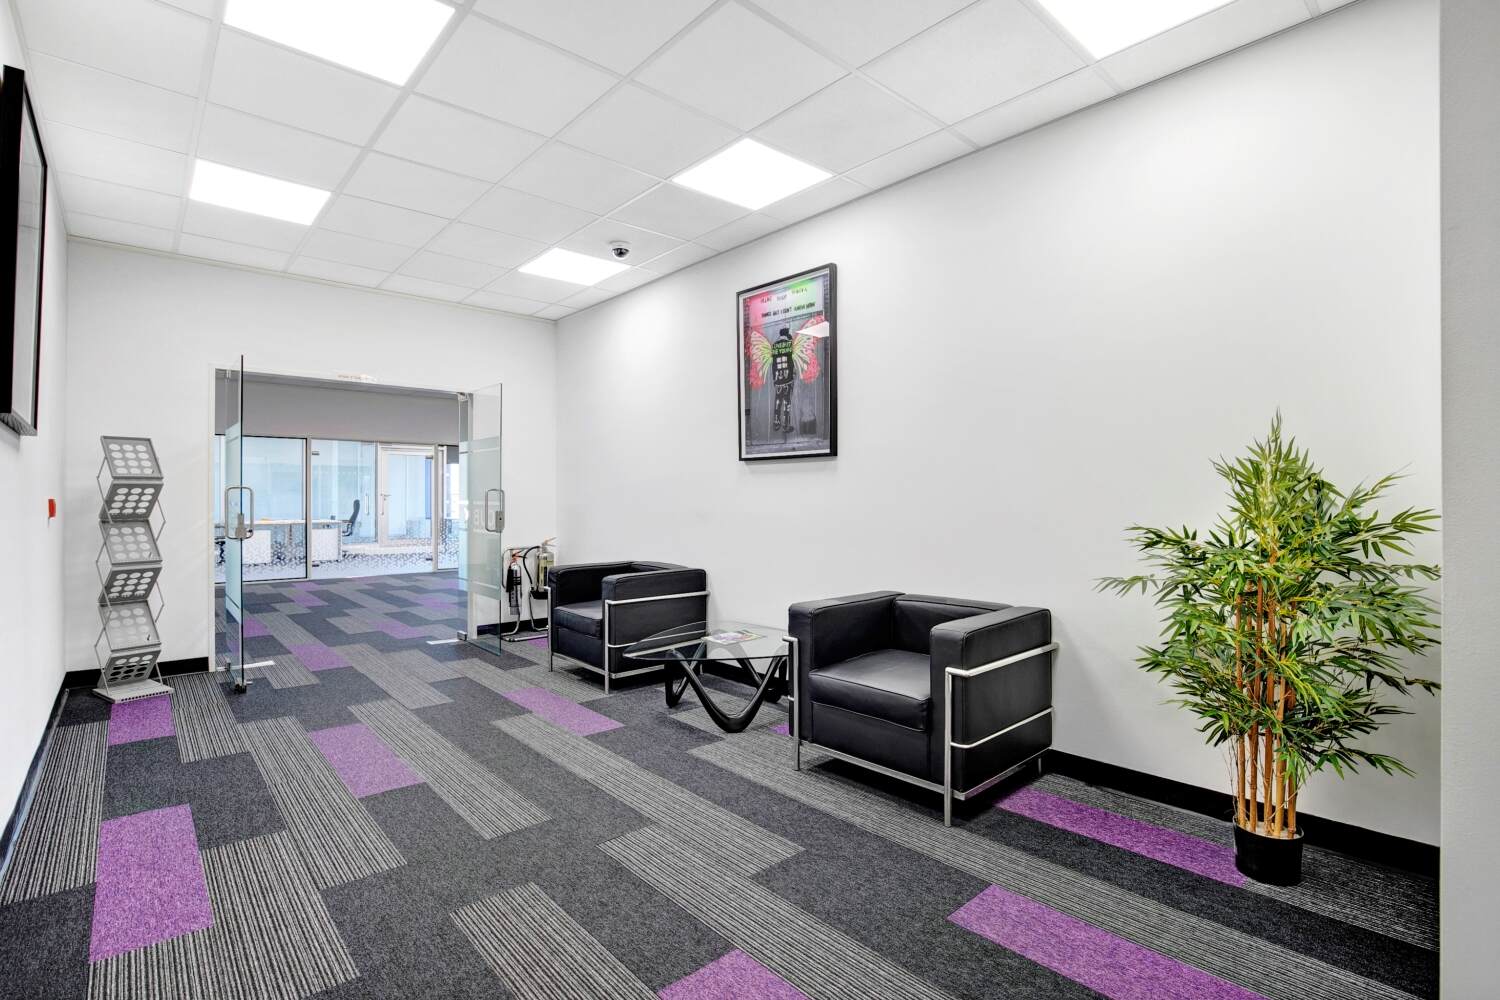 Offices near Luton Airport